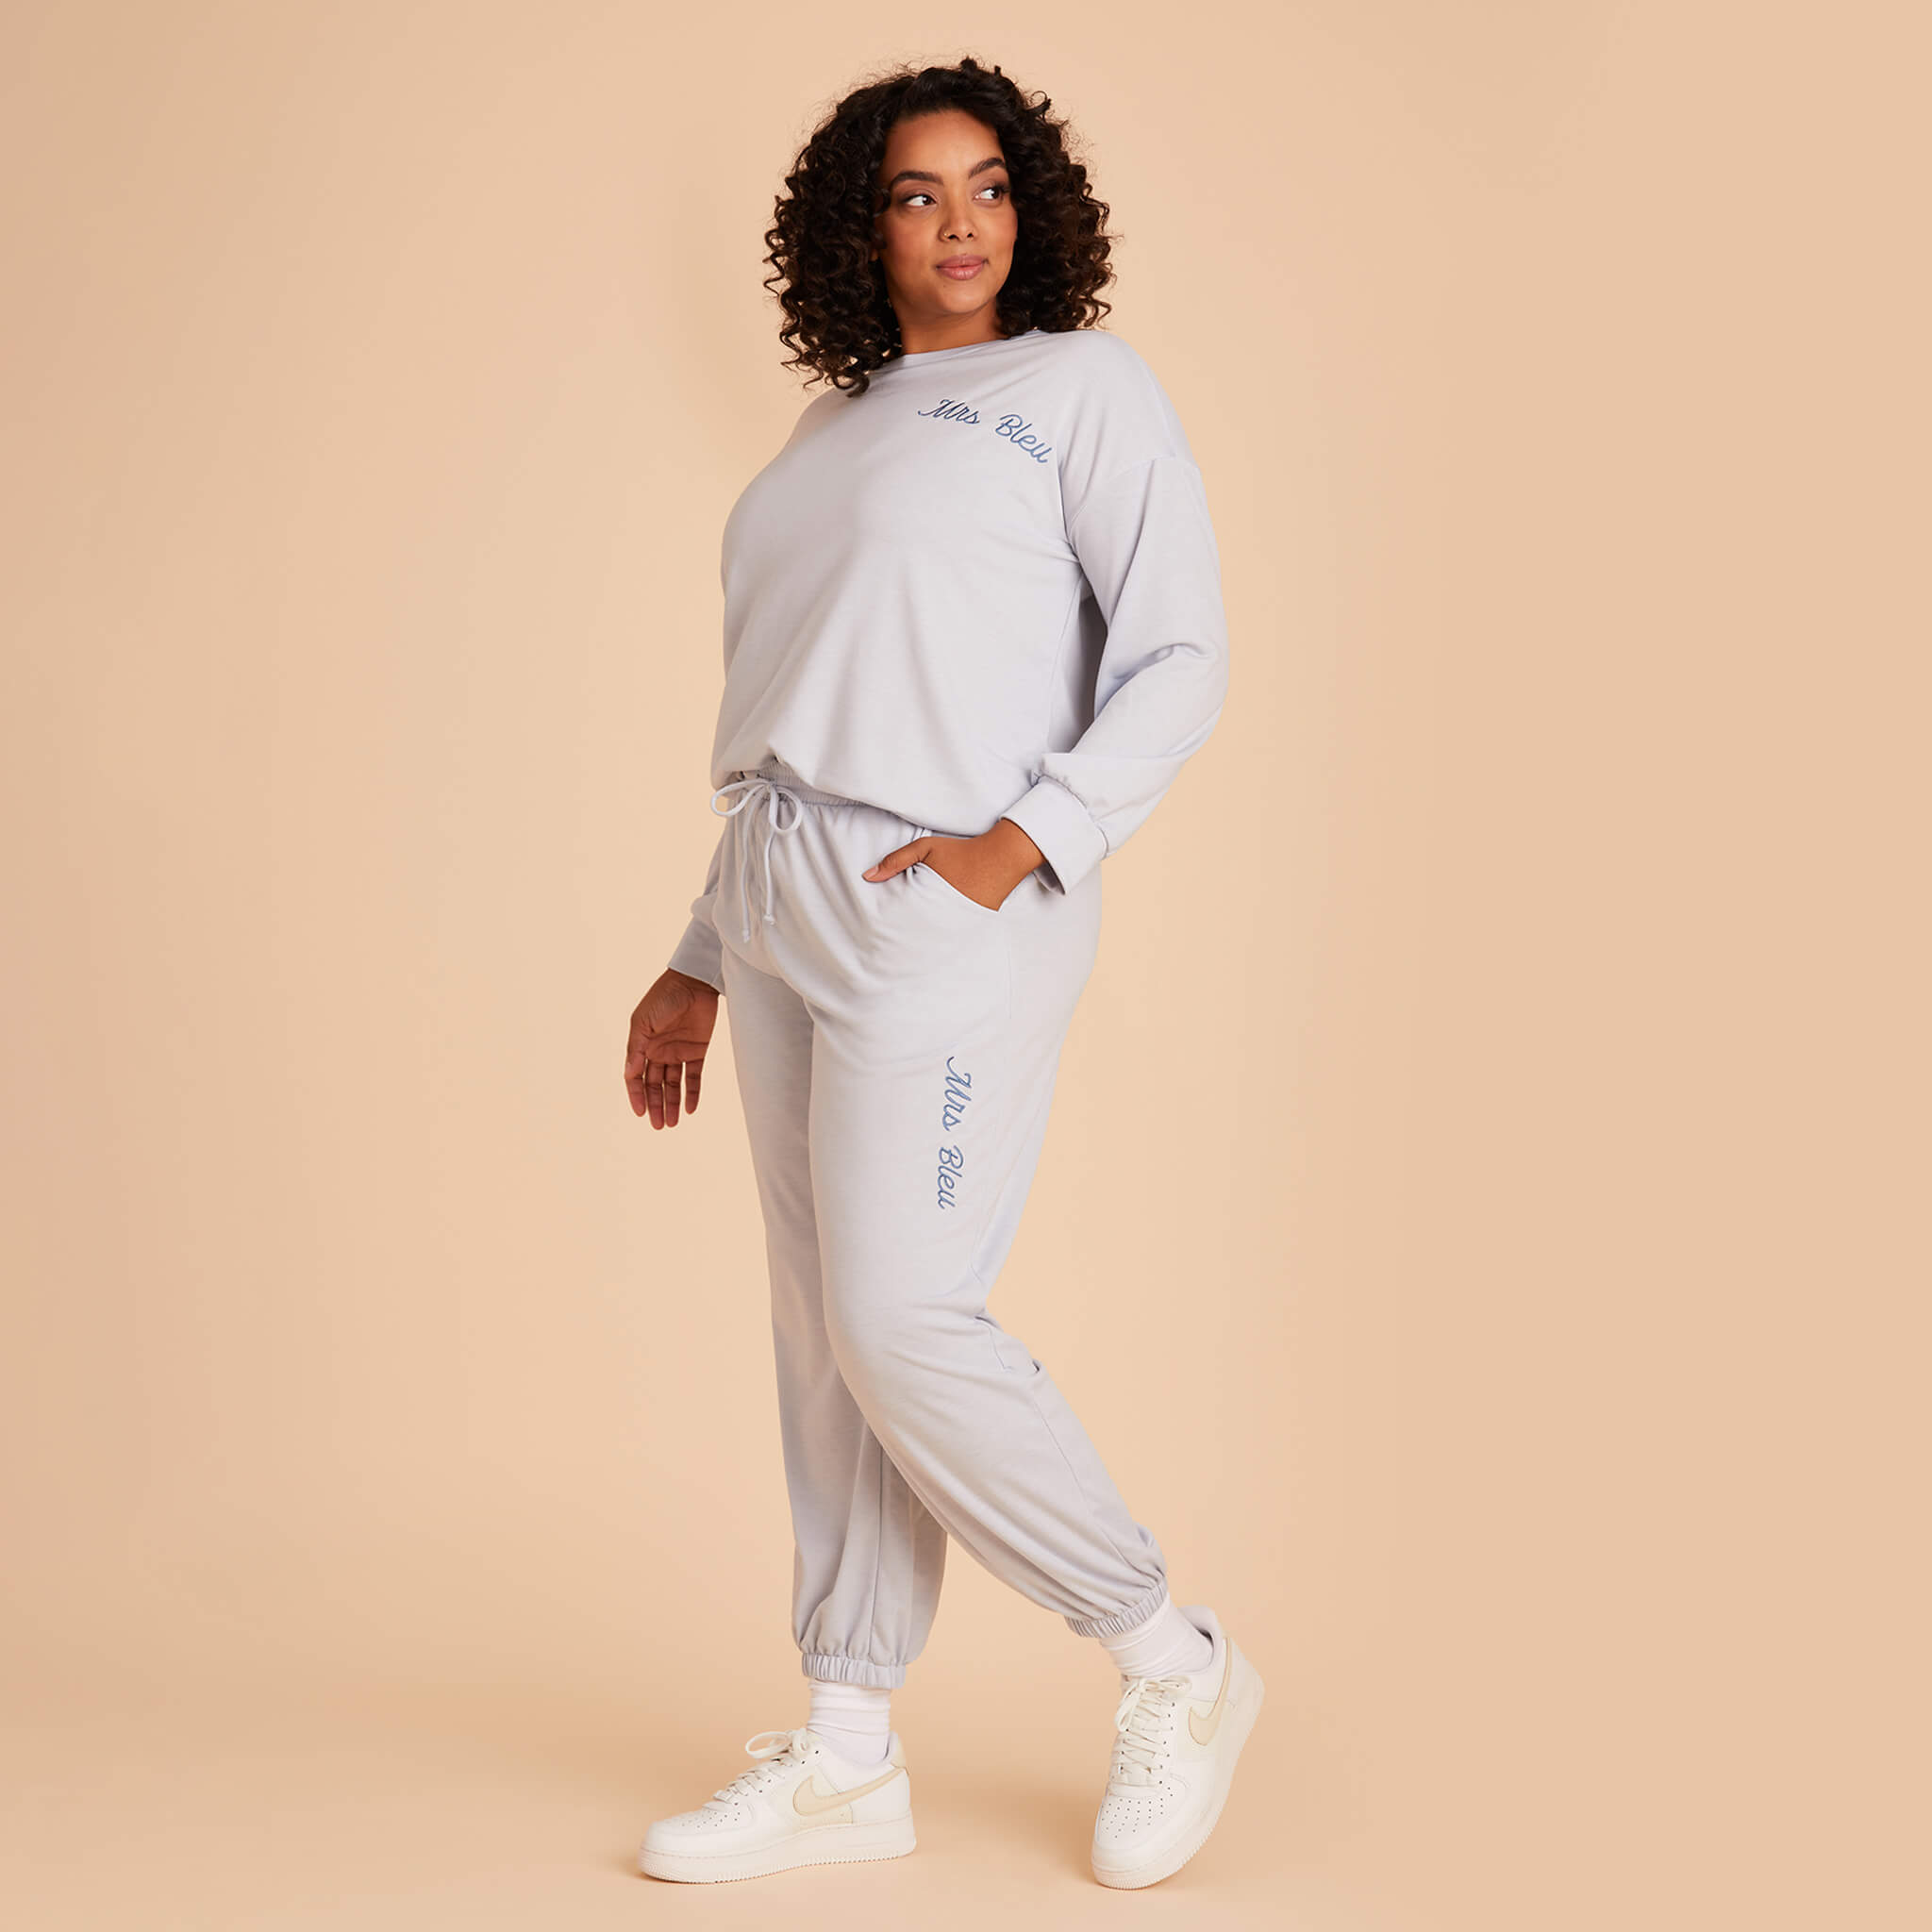 Plus Size Light Blue Crew Neck Sweatshirt  and sweatpants with personalization